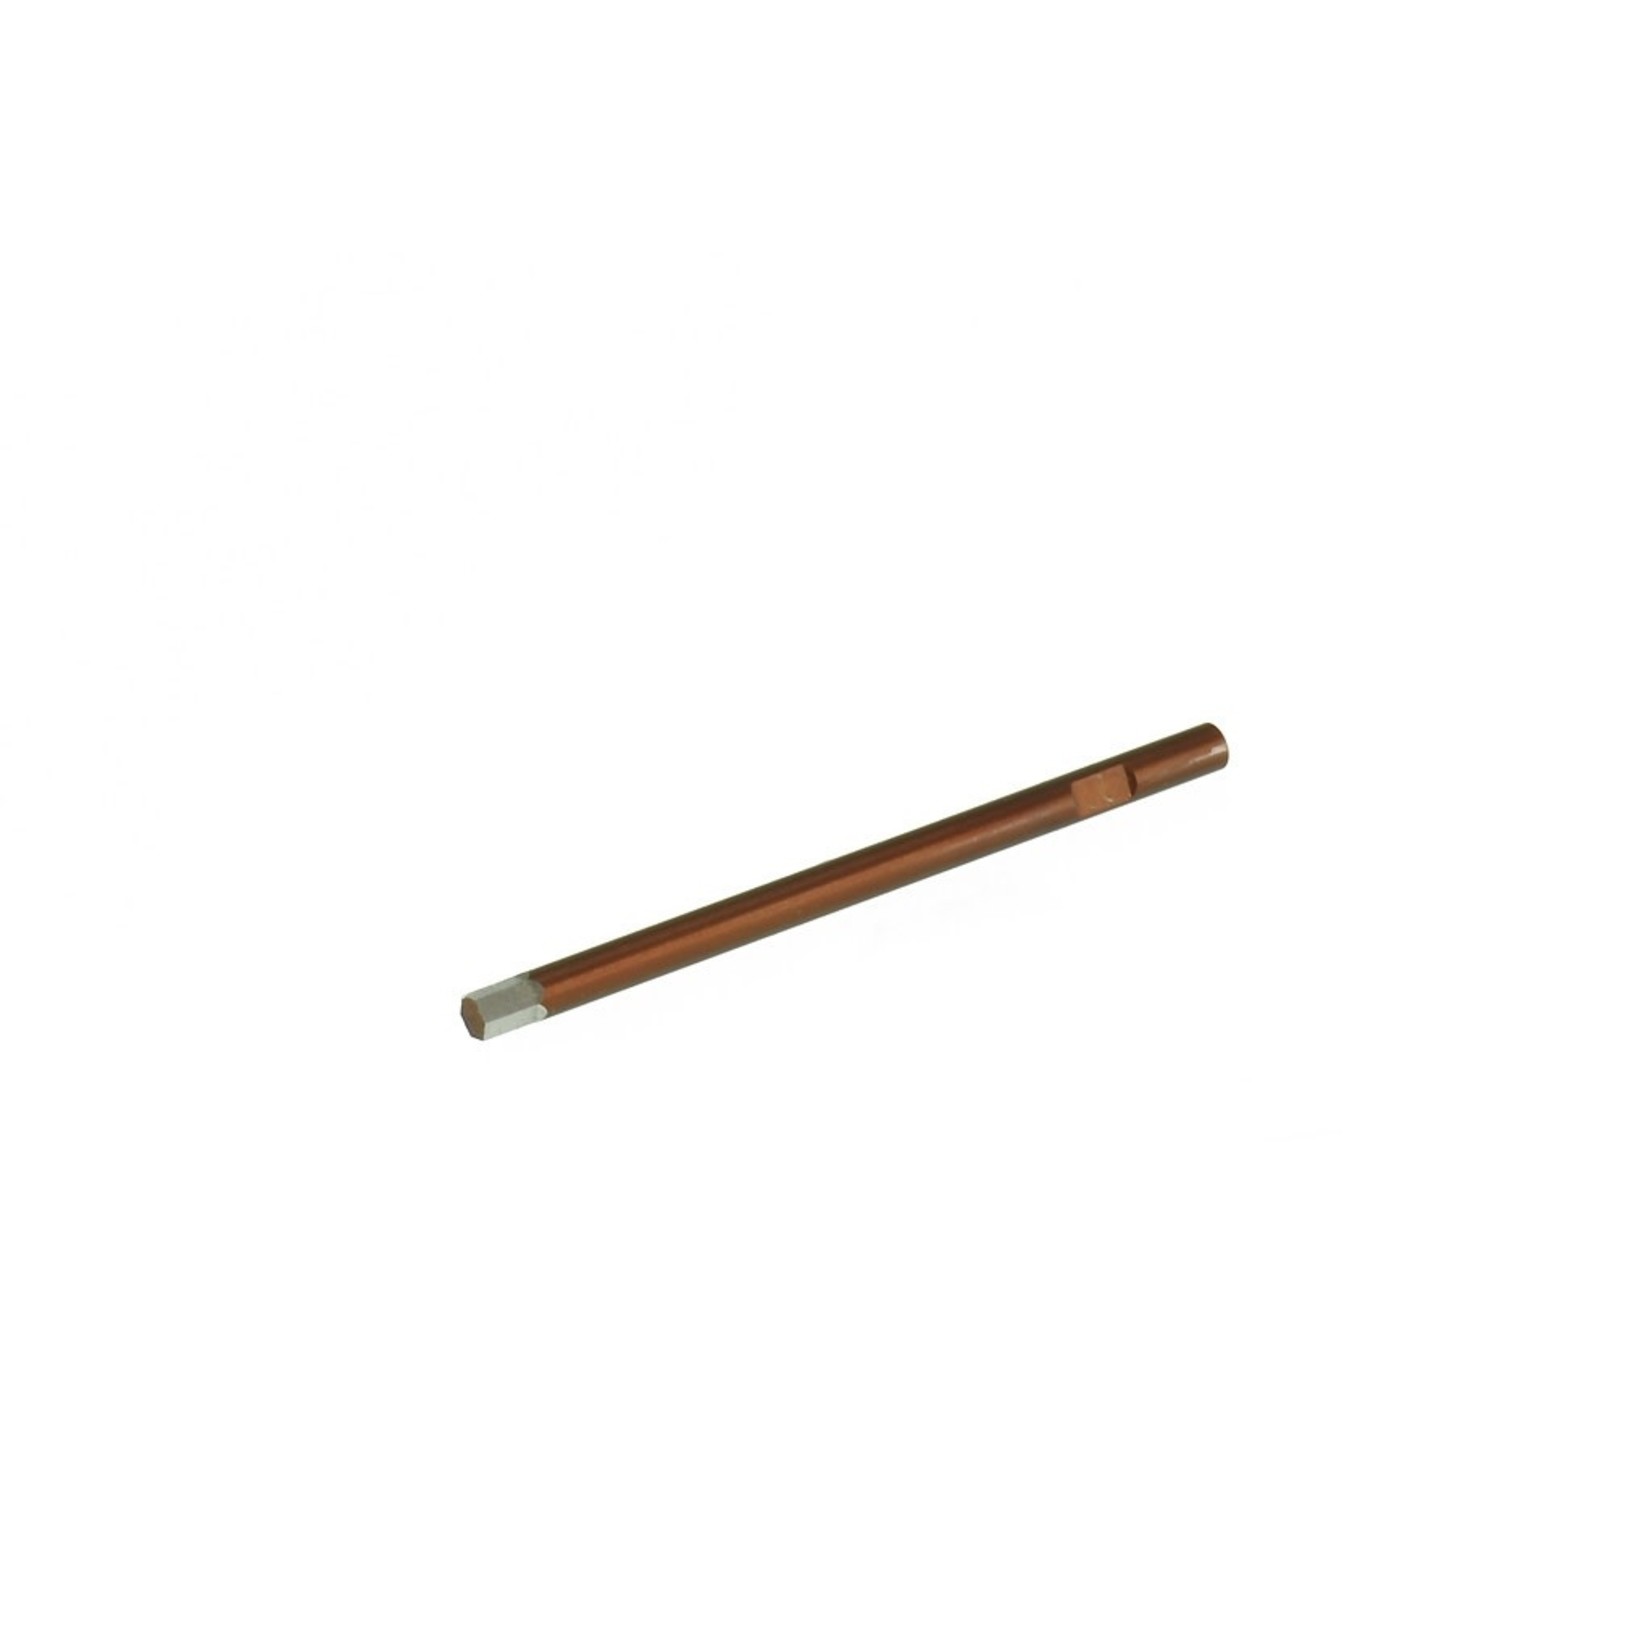 TEAM-EDS ALLEN WRENCH 2.5 X 60MM TIP ONLY